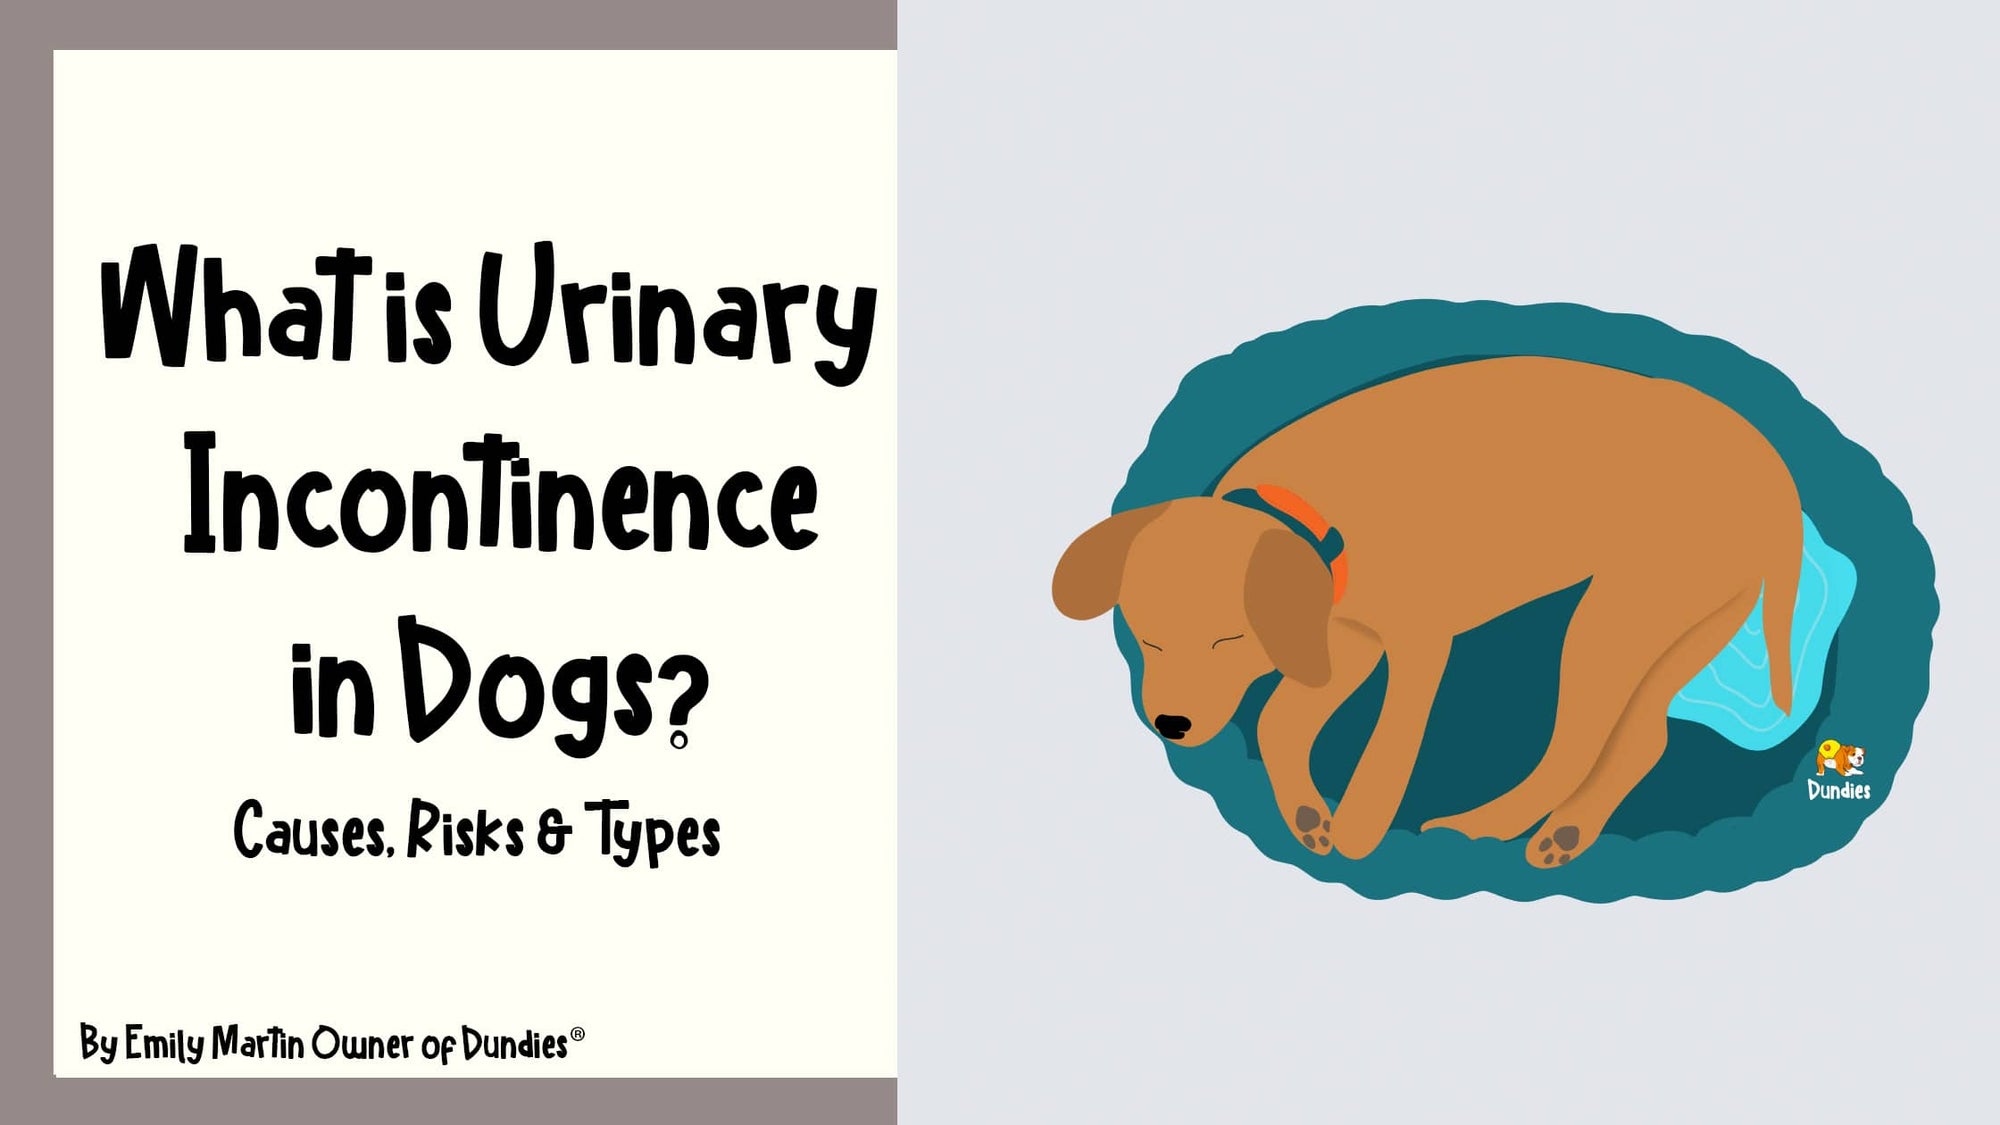 Is My Dog Suffering Urinary Incontinence? - Dundies Pty Ltd